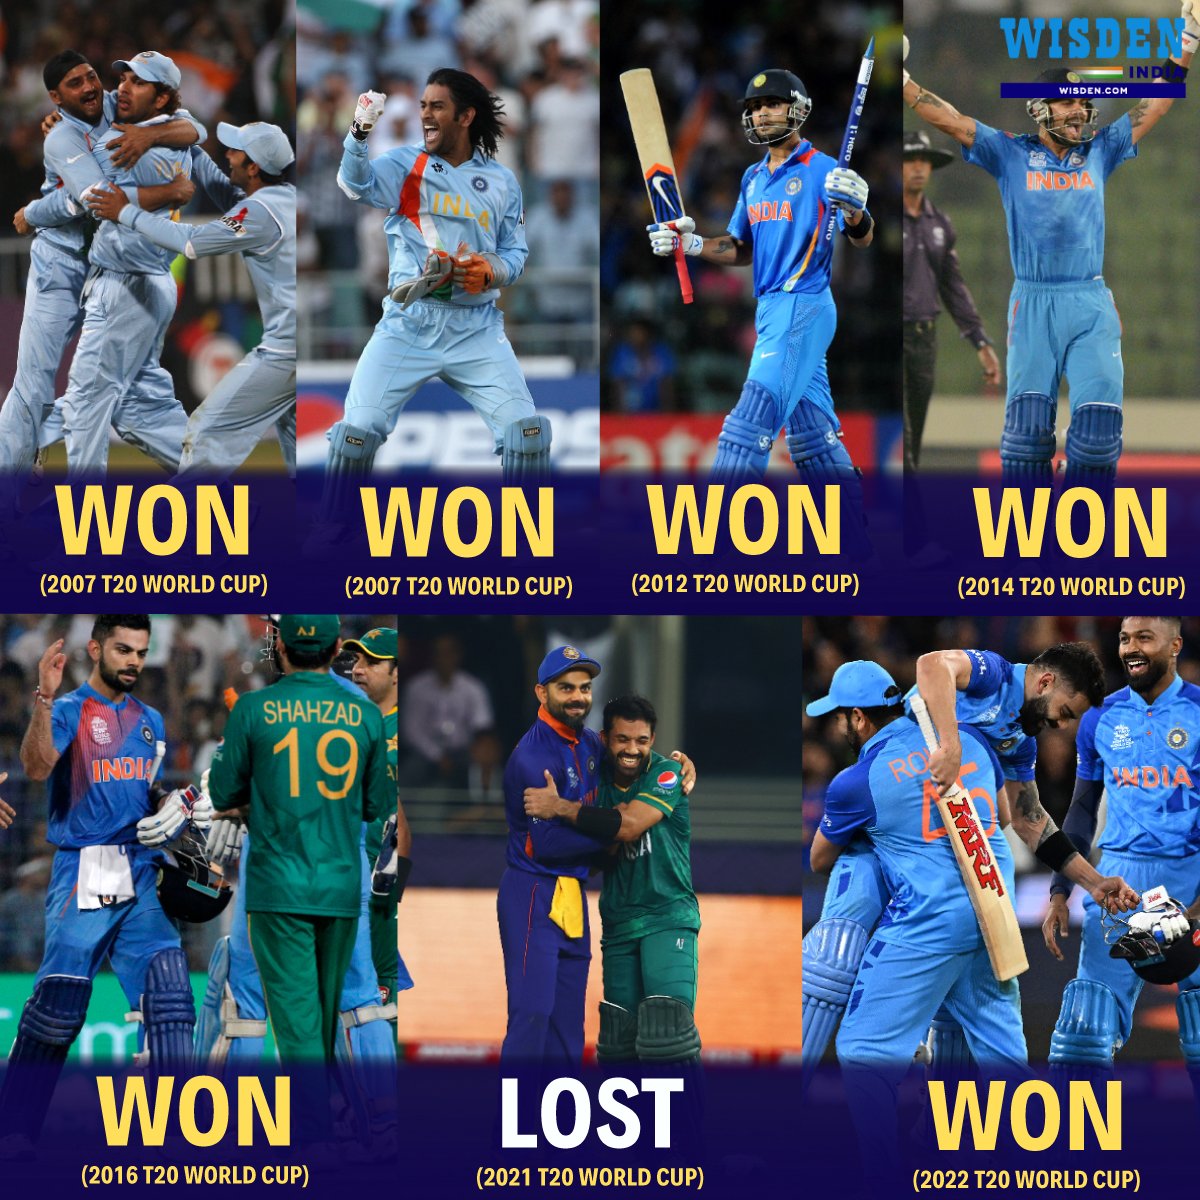 2007 - Won ✅ 2007 - Won ✅ 2012 - Won ✅ 2014 - Won ✅ 2016 - Won ✅ 2021 - Lost ❌ 2022 - Won ✅ India have won six out of the seven games against Pakistan in the men's T20 World Cup👏 #India #Cricket #T20WorldCup #INDvsPak